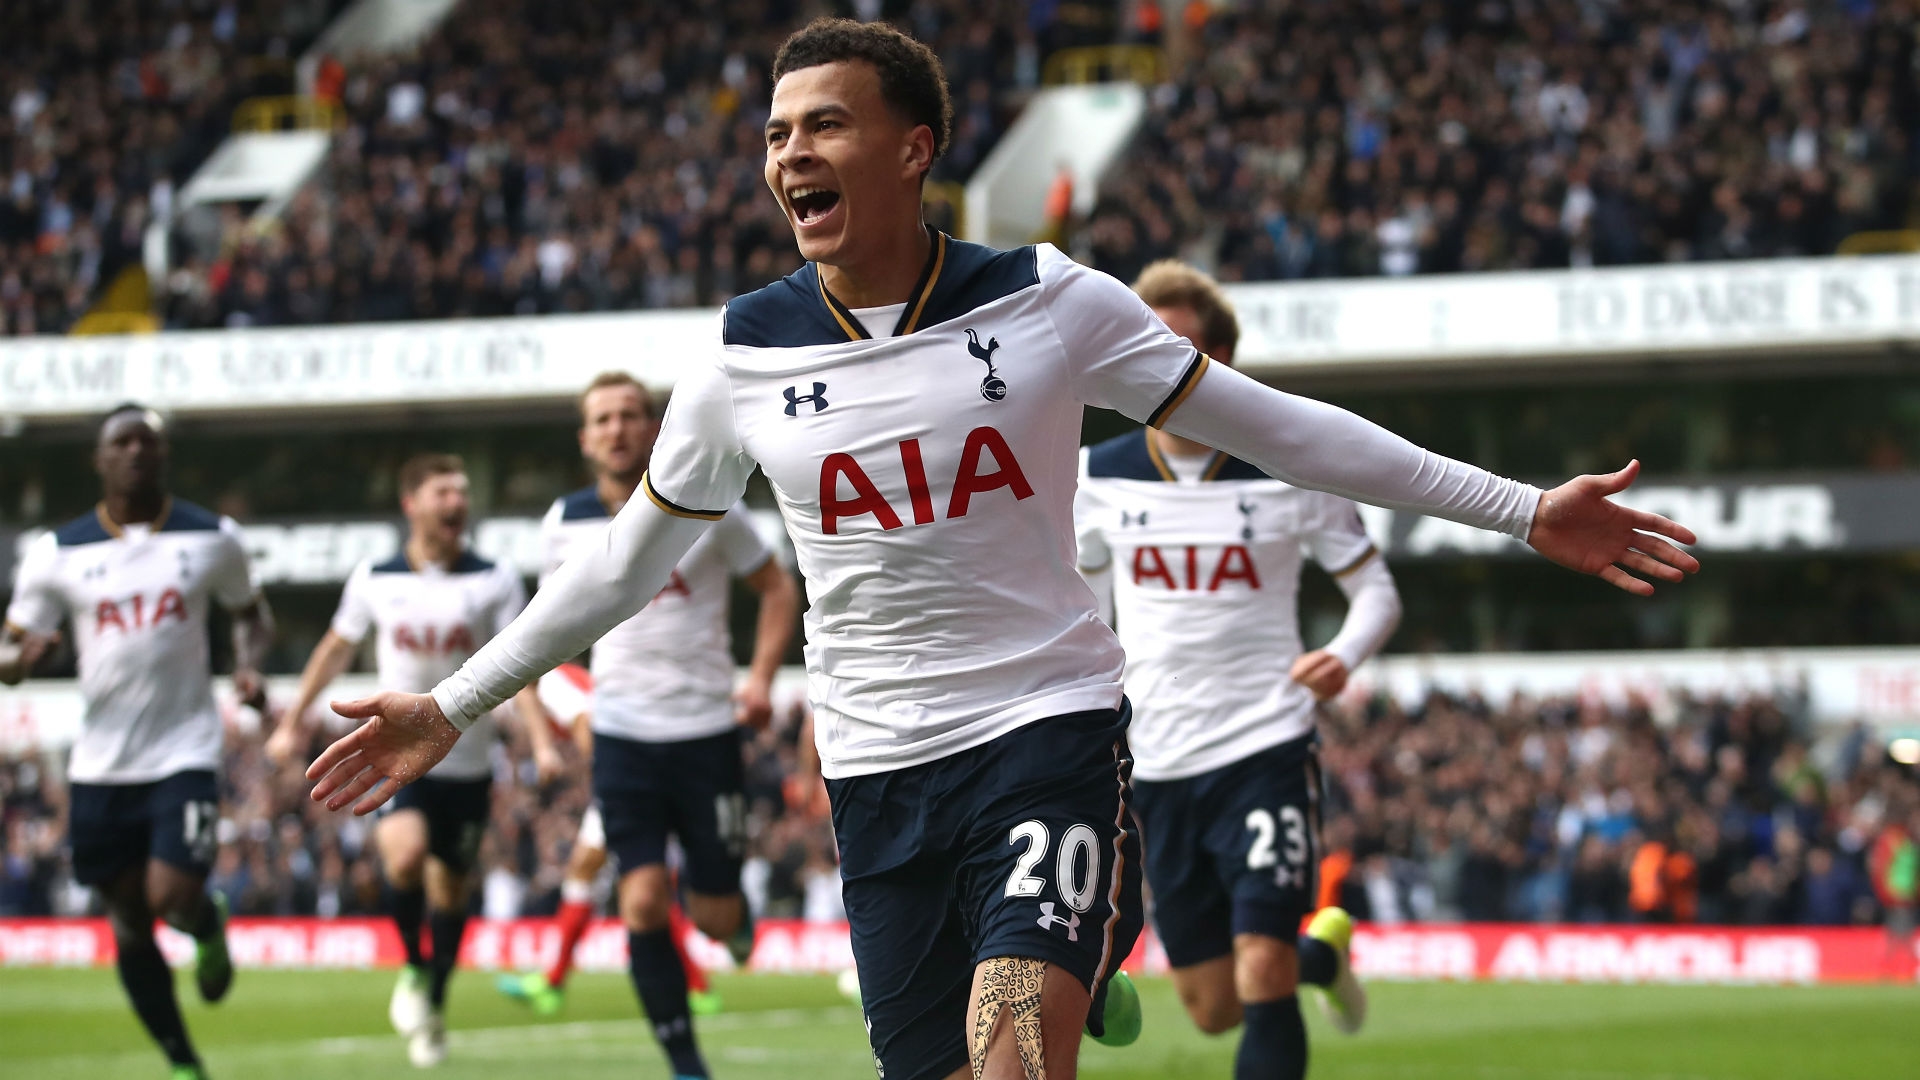 A recent study suggested that 21-year-old midfielder Dele Alli could be involved in the largest transfer in football if he were to leave Spurs.